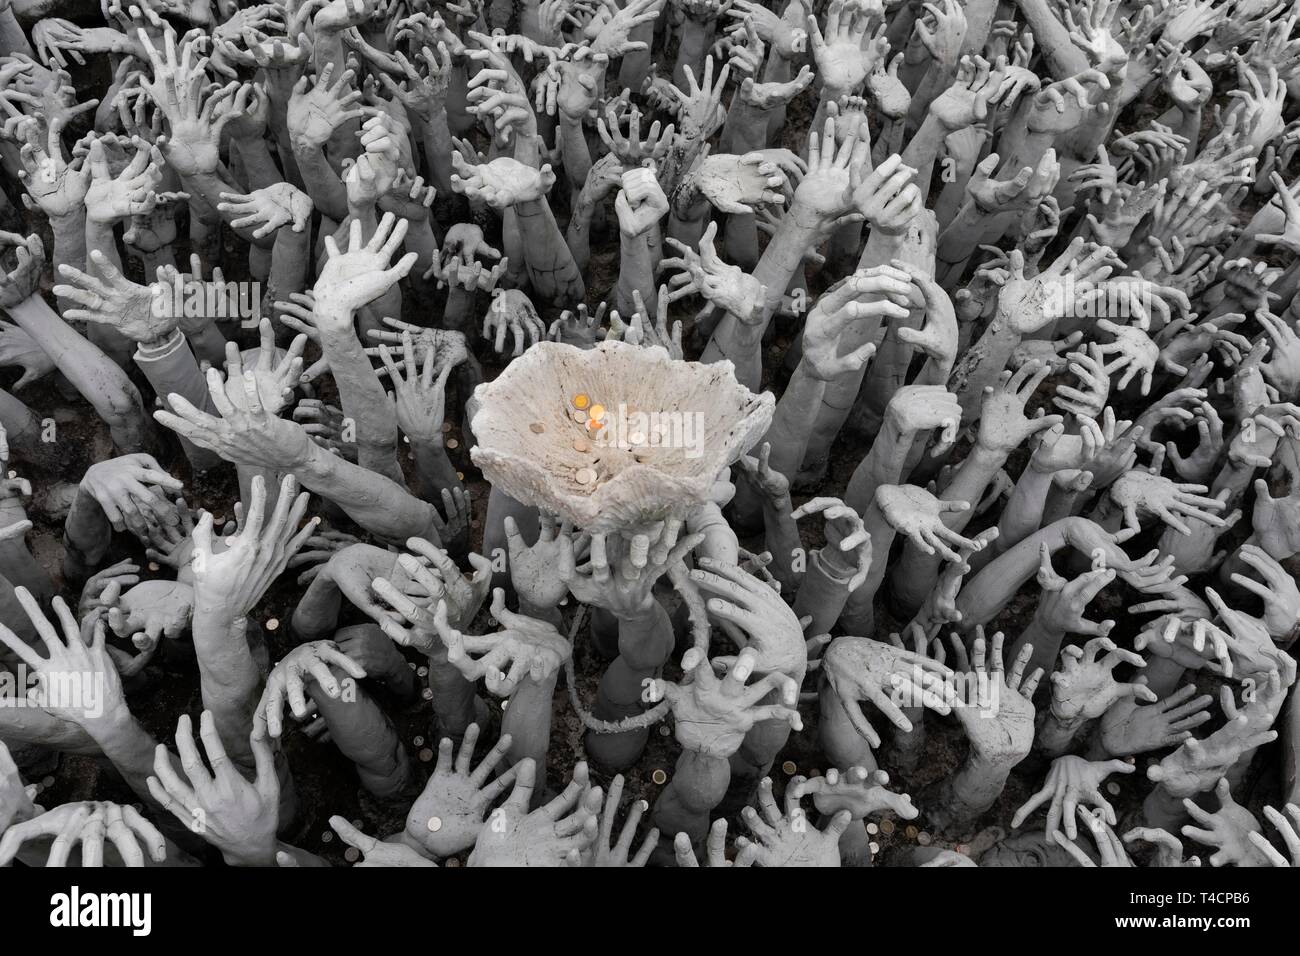 Hands pleading for help, representation of hell, bridge to the entrance of white temples, Wat Rong Khun, Chiang Rai, Northern Thailand, Thailand Stock Photo